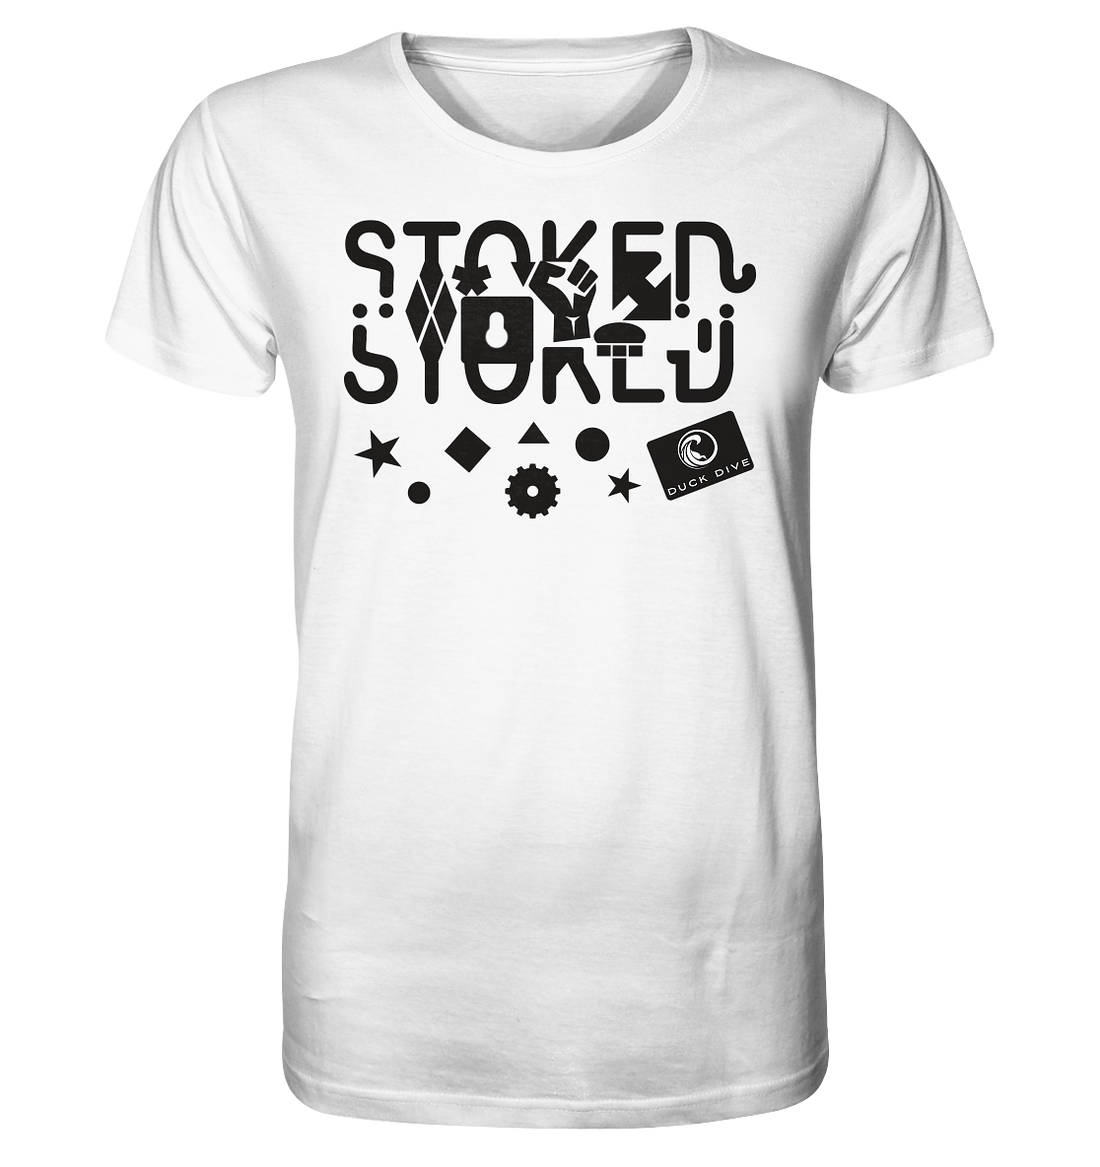 Stoked Floded - Organic Shirt - Duck Dive Clothing